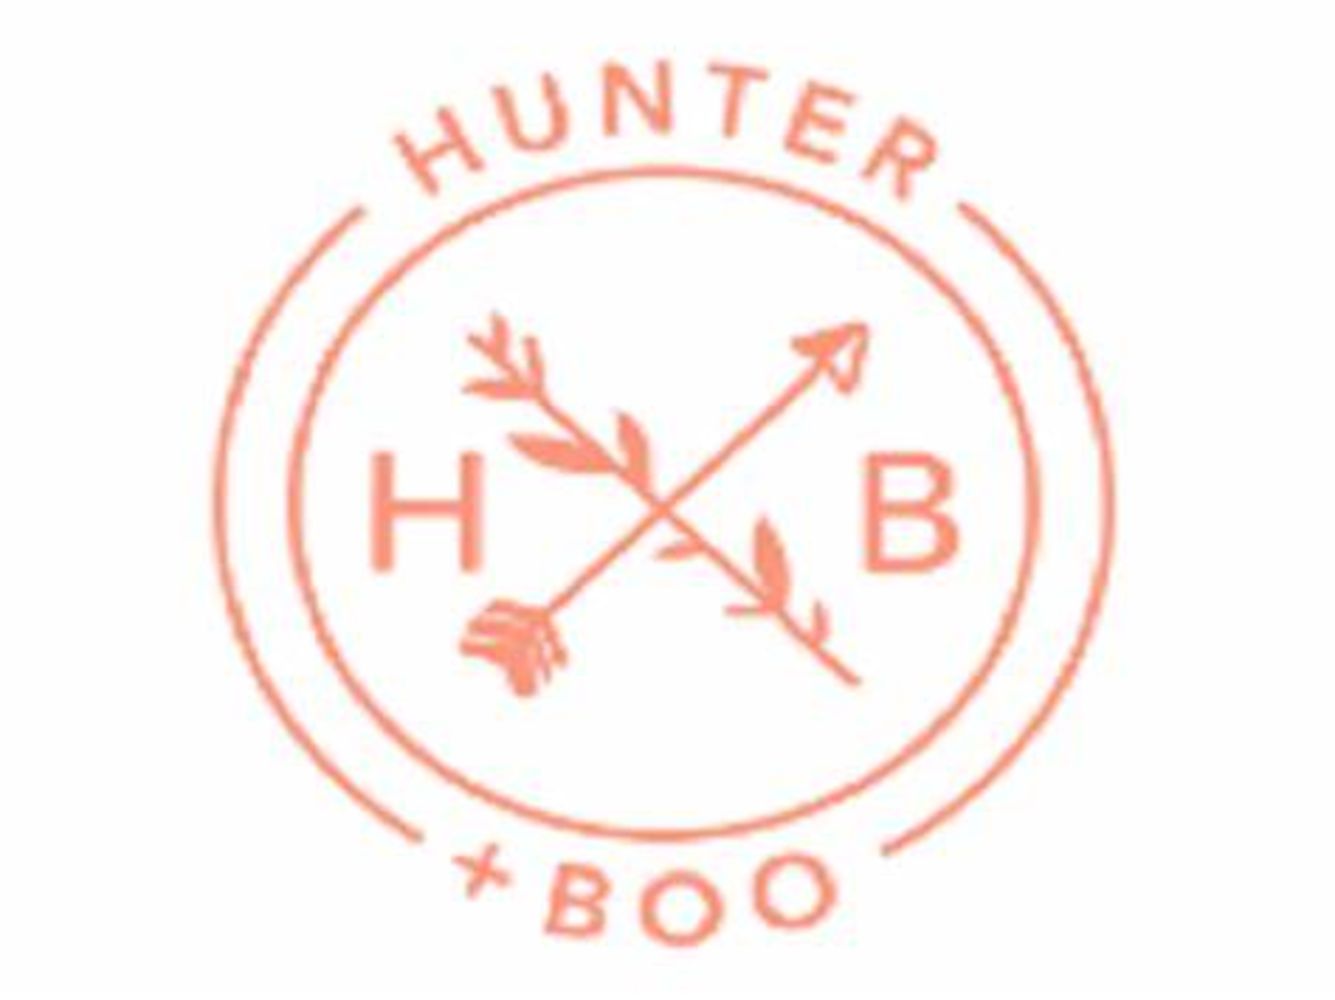 HUGE SALE OF BRAND NEW CHILDRENS CLOTHING FROM HUNTER & BOO,DRESSES SHORTS & T/SHIRT SETS PLAYSUITS PYJAMAS LEGGINGS JUMPSUITS & MUCH MORE!!..